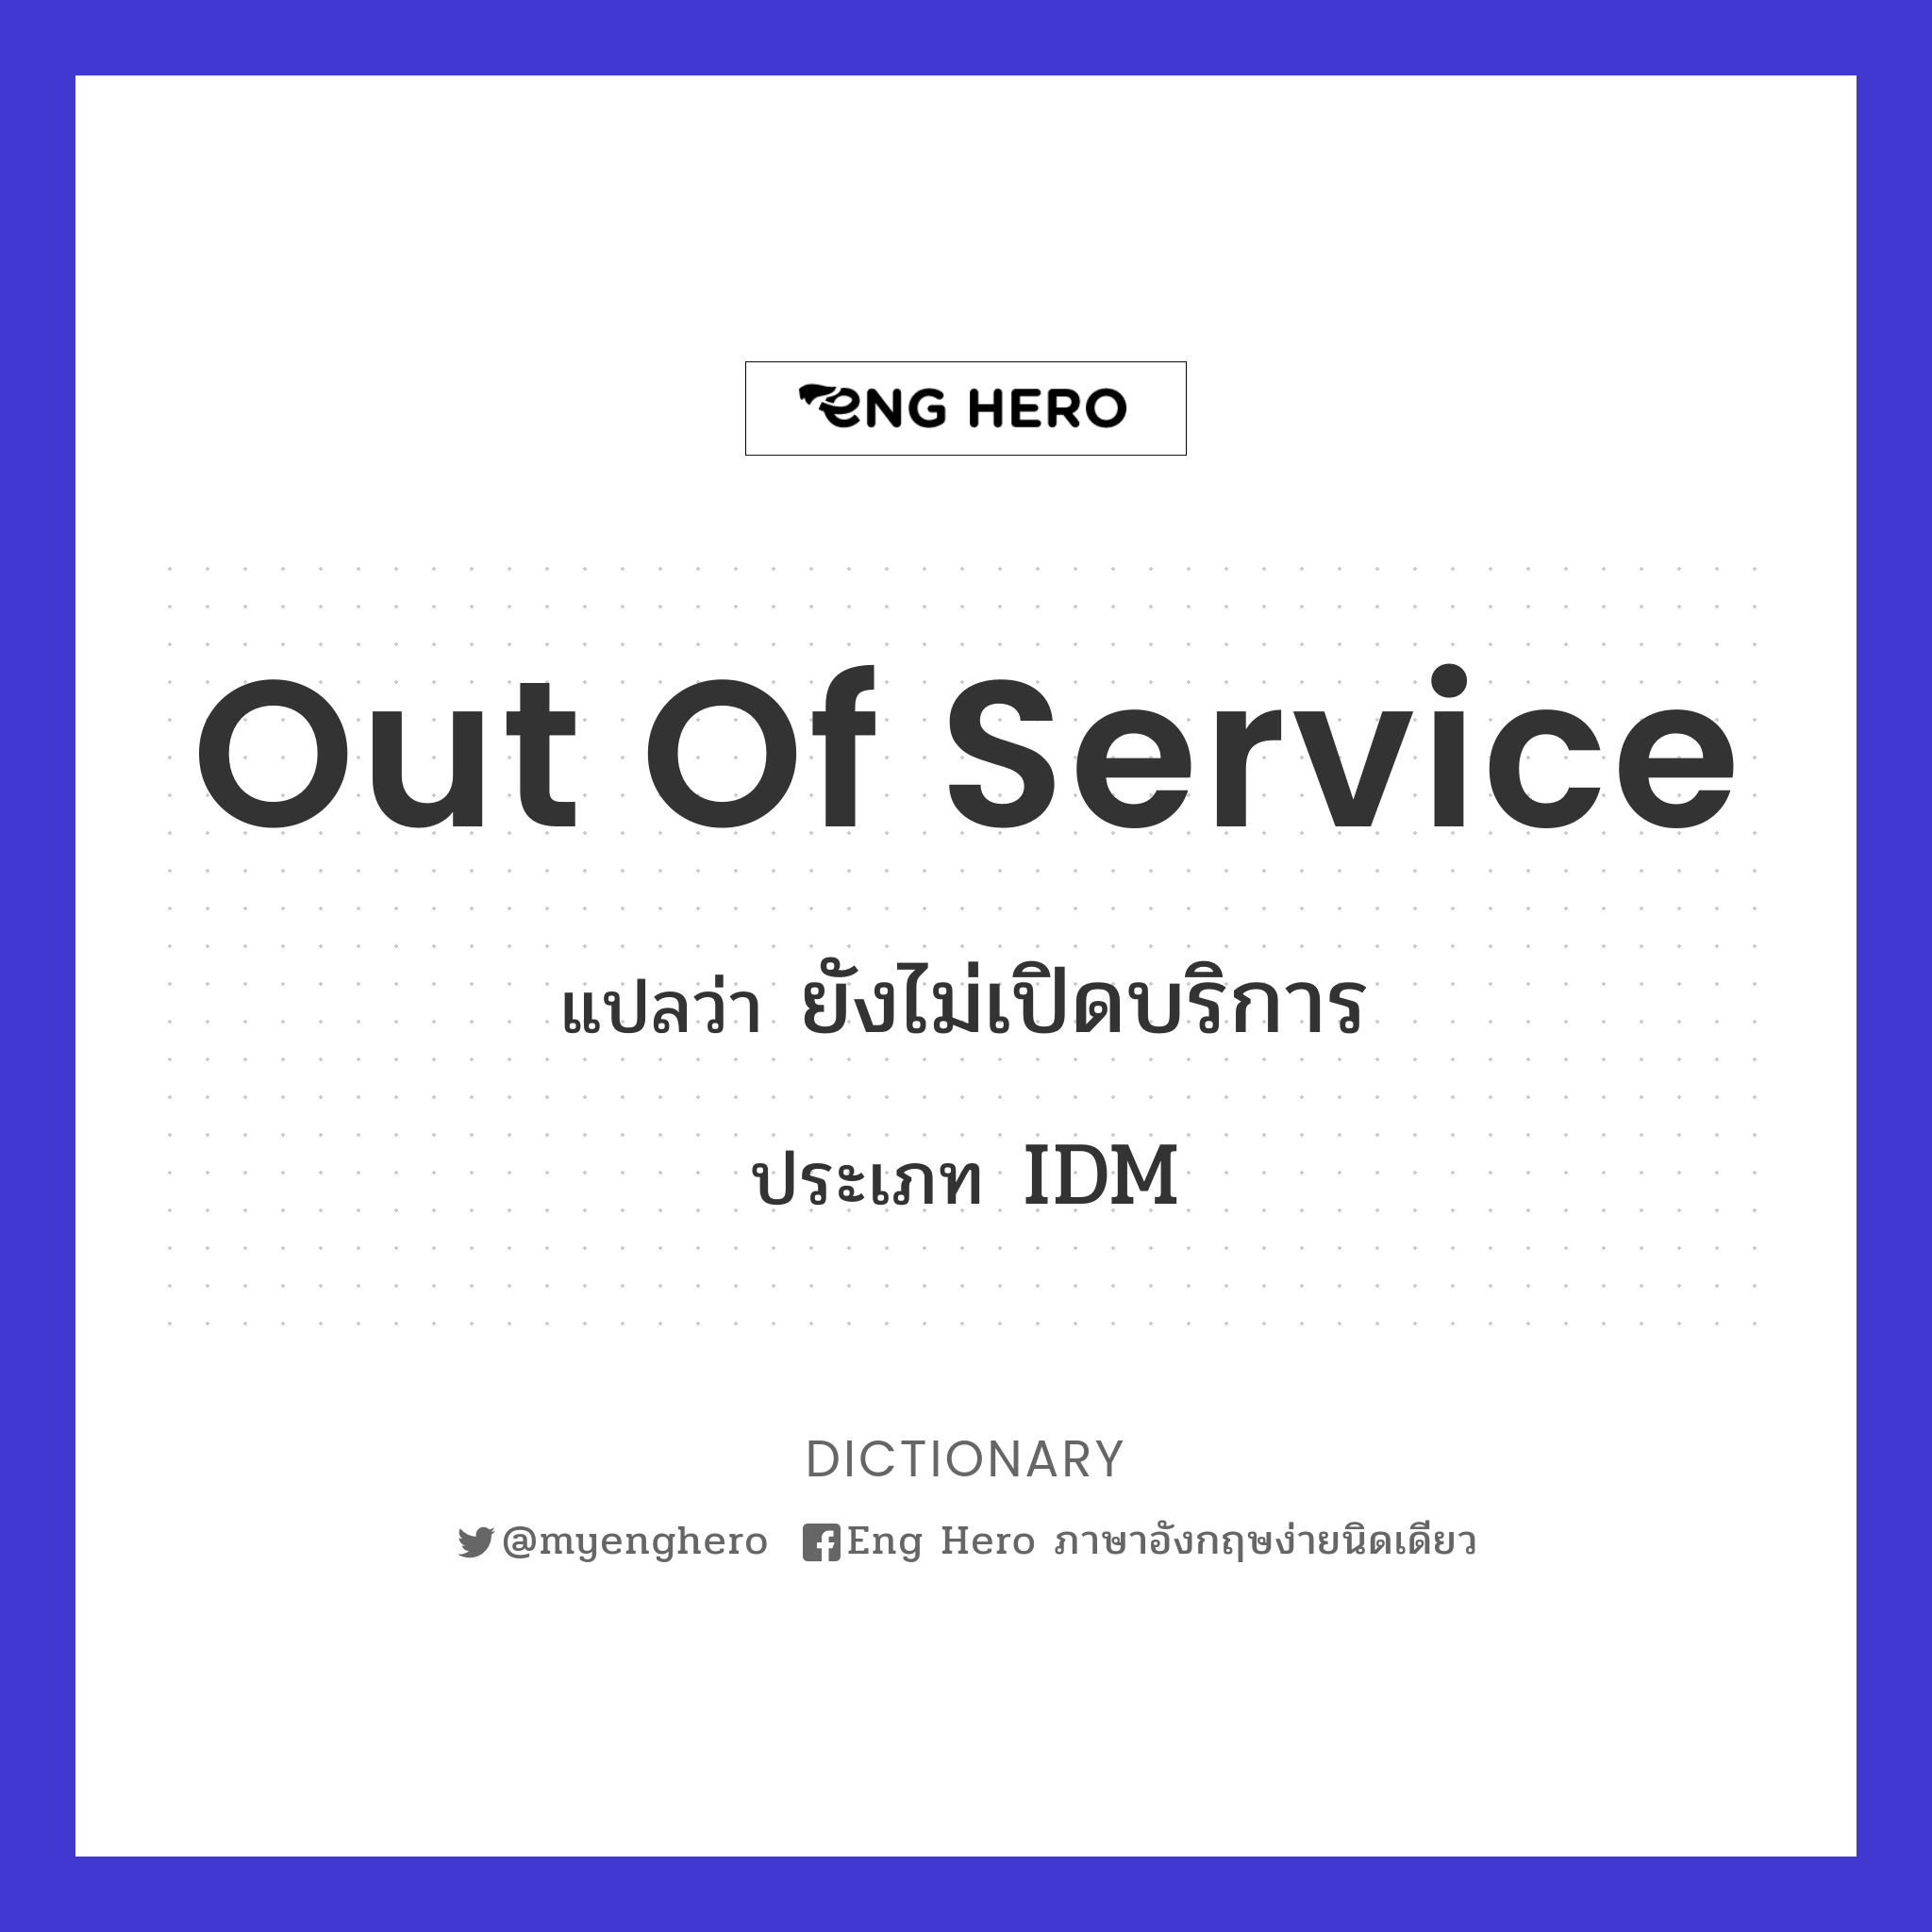 out of service